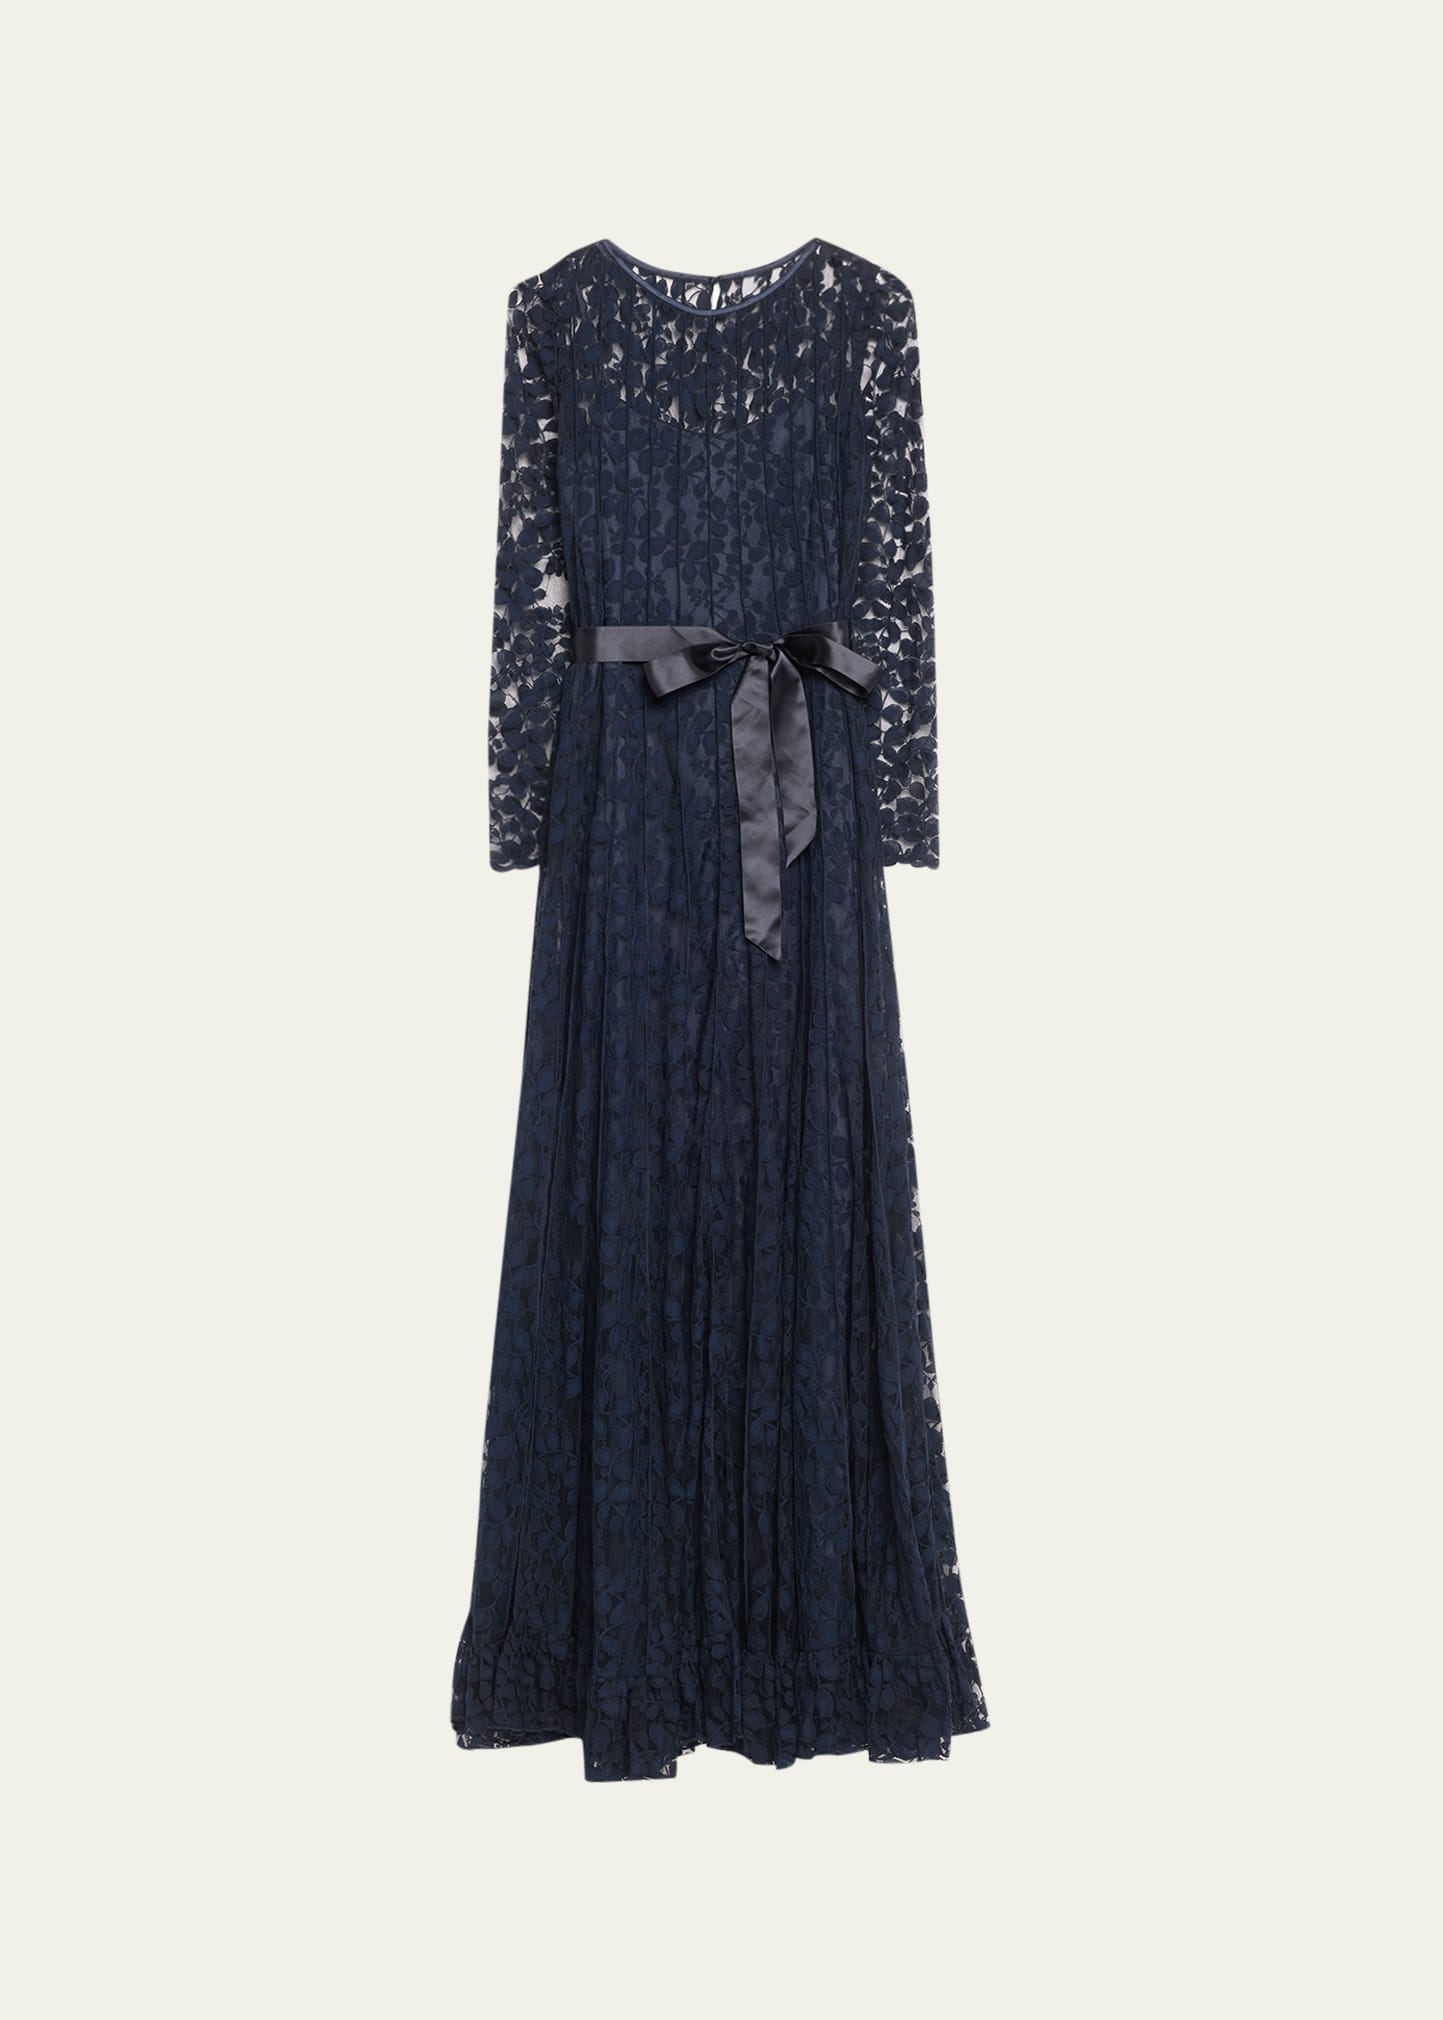 Rickie Freeman For Teri Jon Long-sleeve A-line Floral Lace Gown In Navy